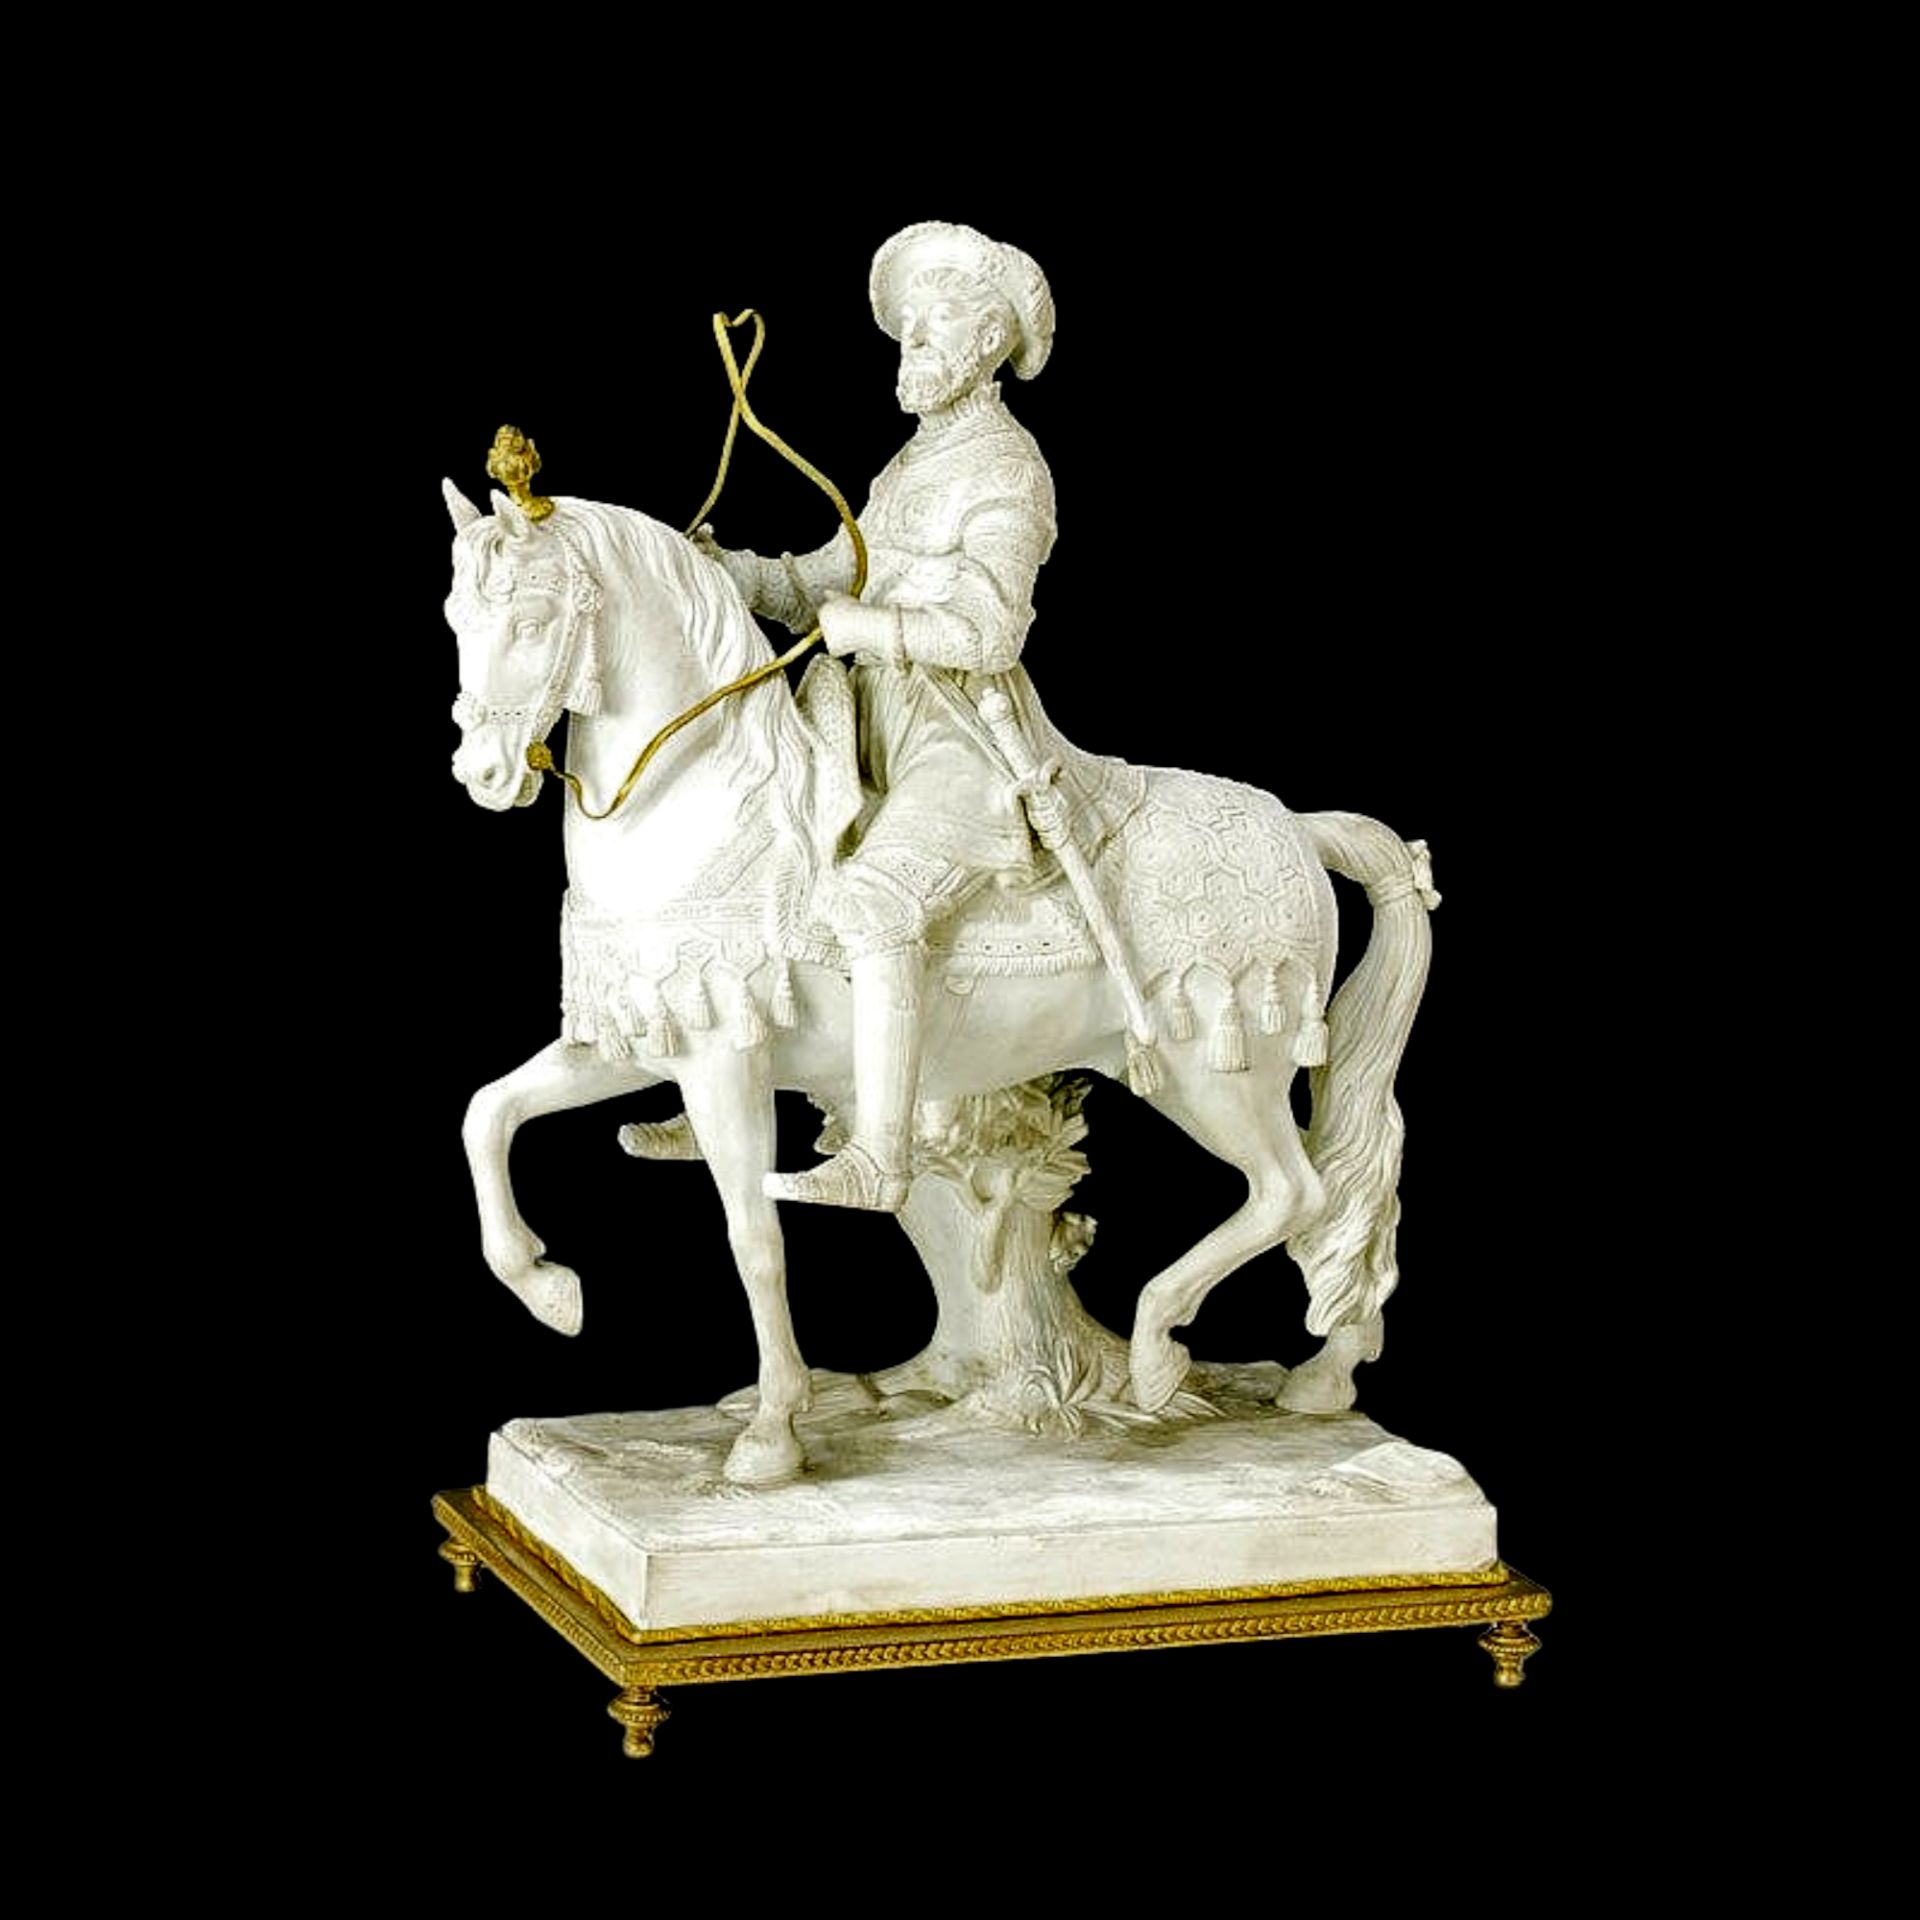 Porcelain (bisquit) equestrian statue of french king Francis I.